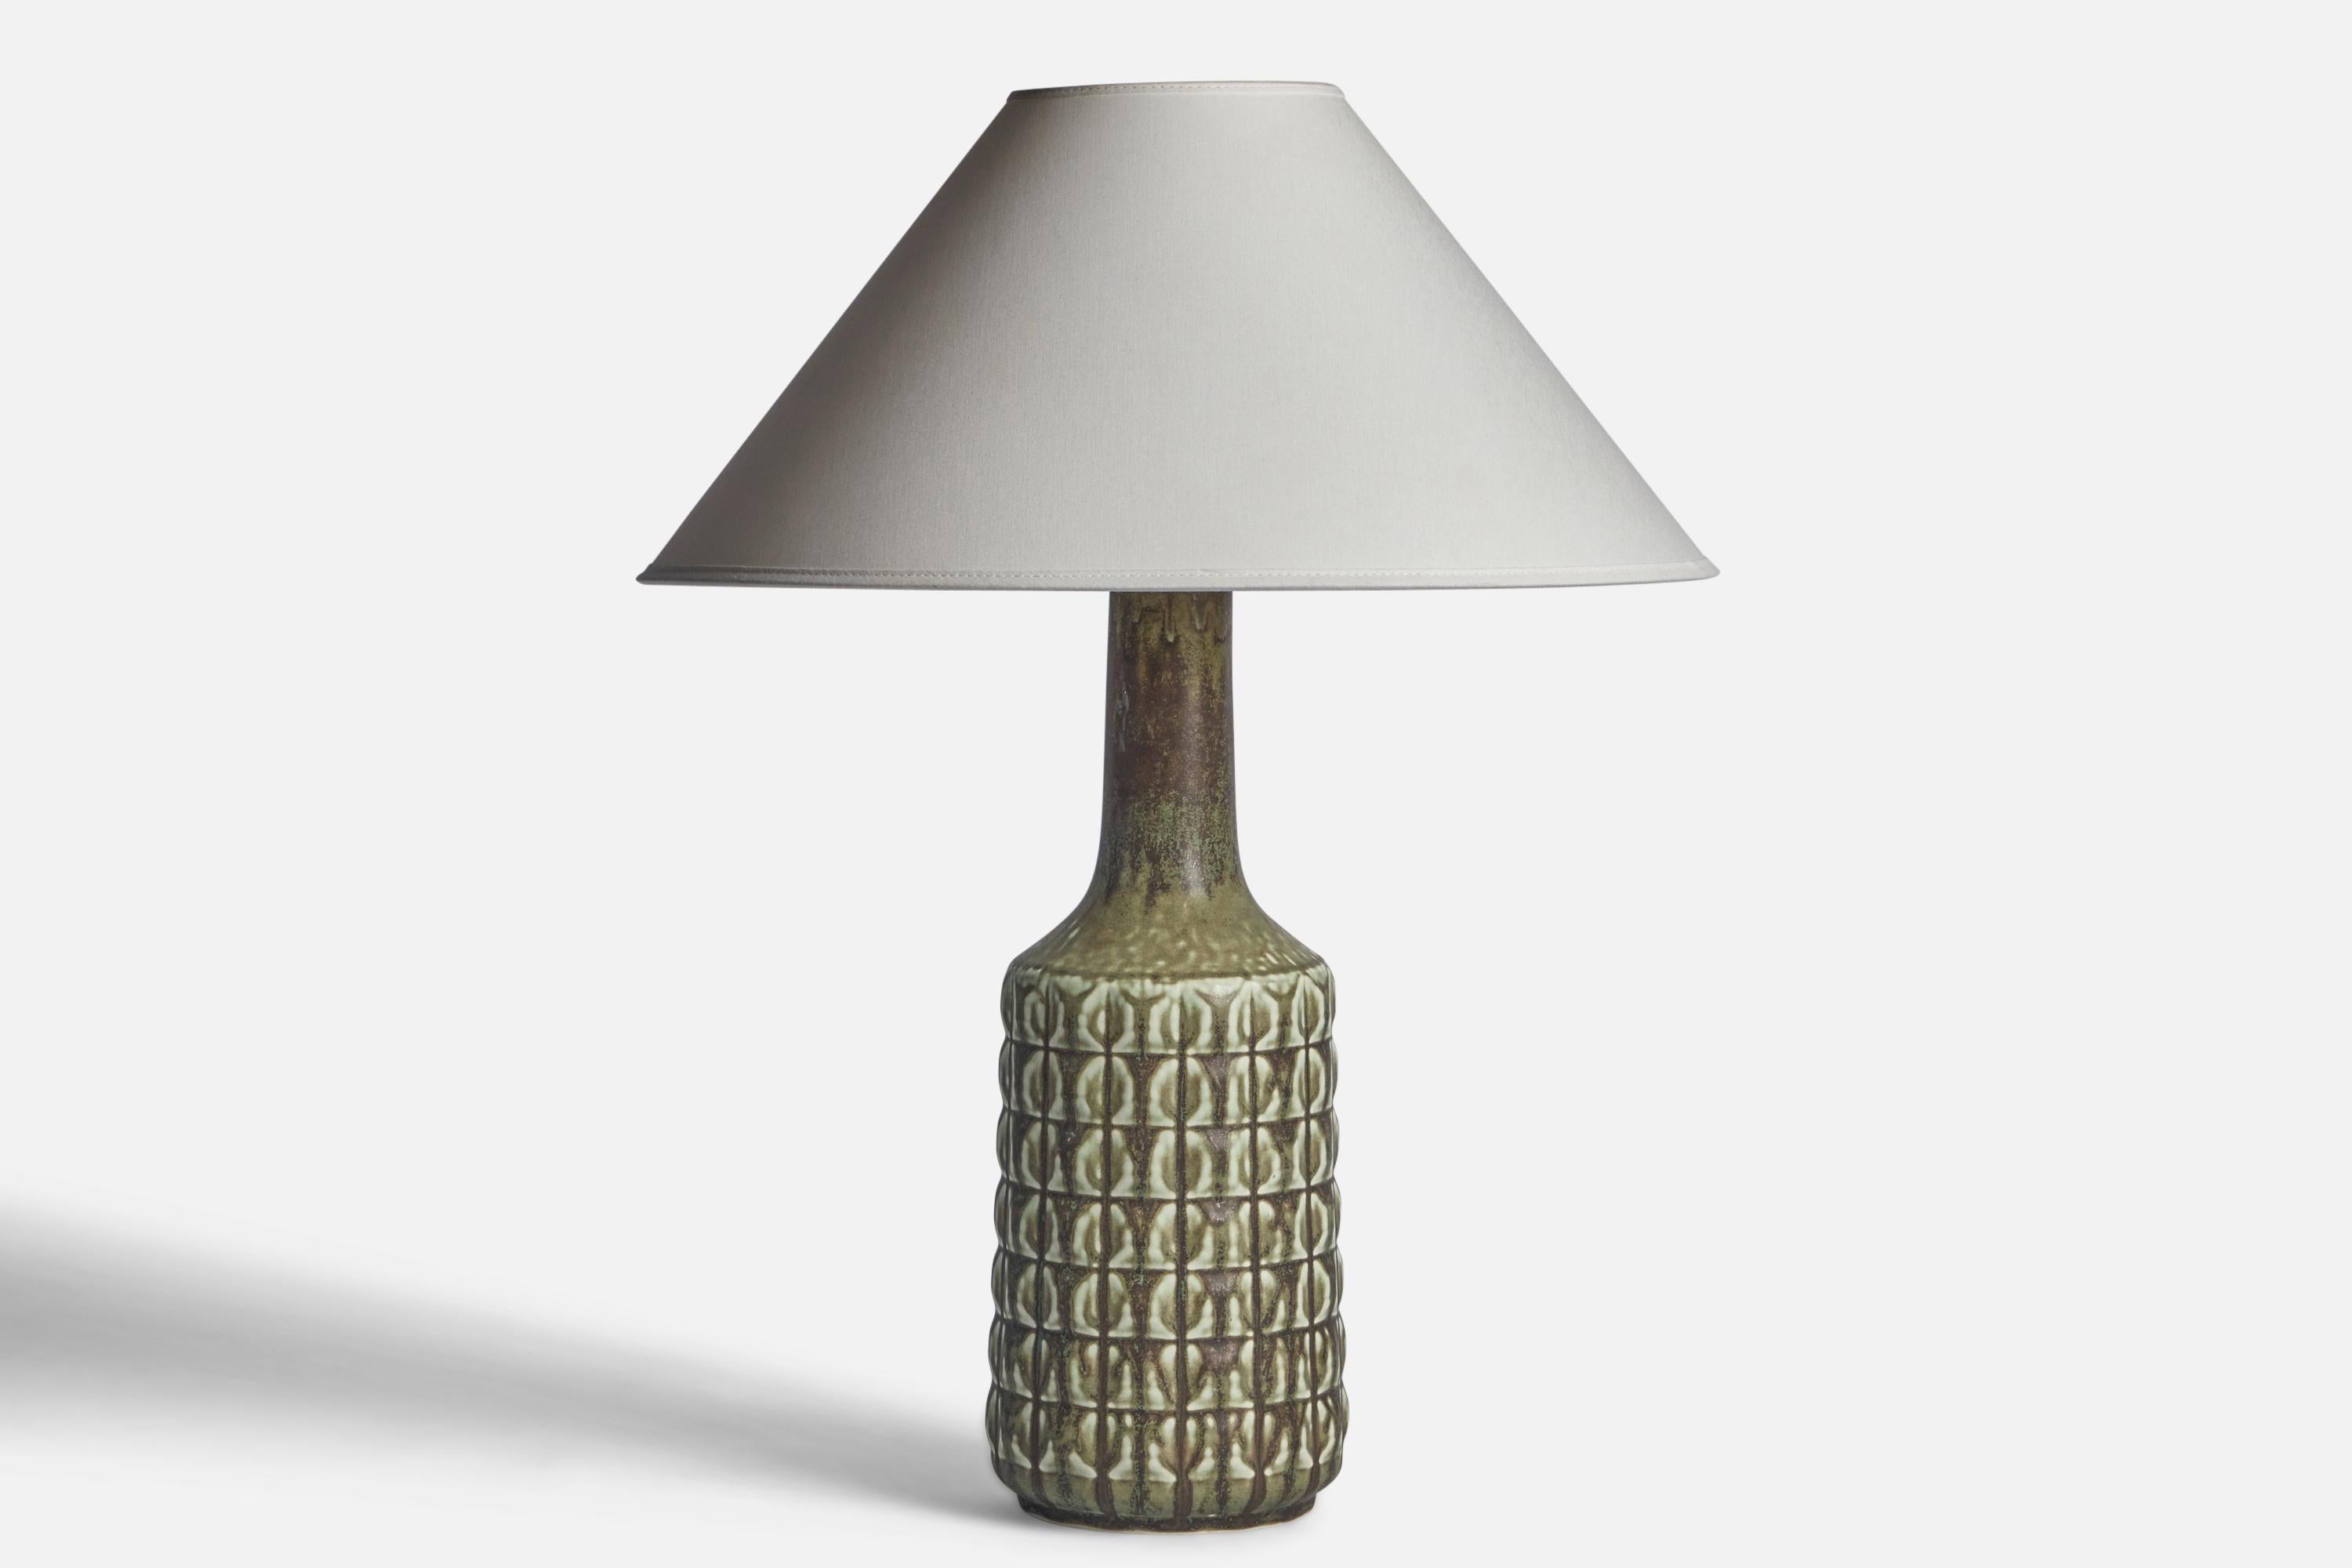 A green-glazed stoneware table lamp designed and produced by Desiree, Denmark, 1960s.

Dimensions of Lamp (inches): 17” H x 5.25” Diameter
Dimensions of Shade (inches): 4.5” Top Diameter x 16” Bottom Diameter x 7.25” H
Dimensions of Lamp with Shade